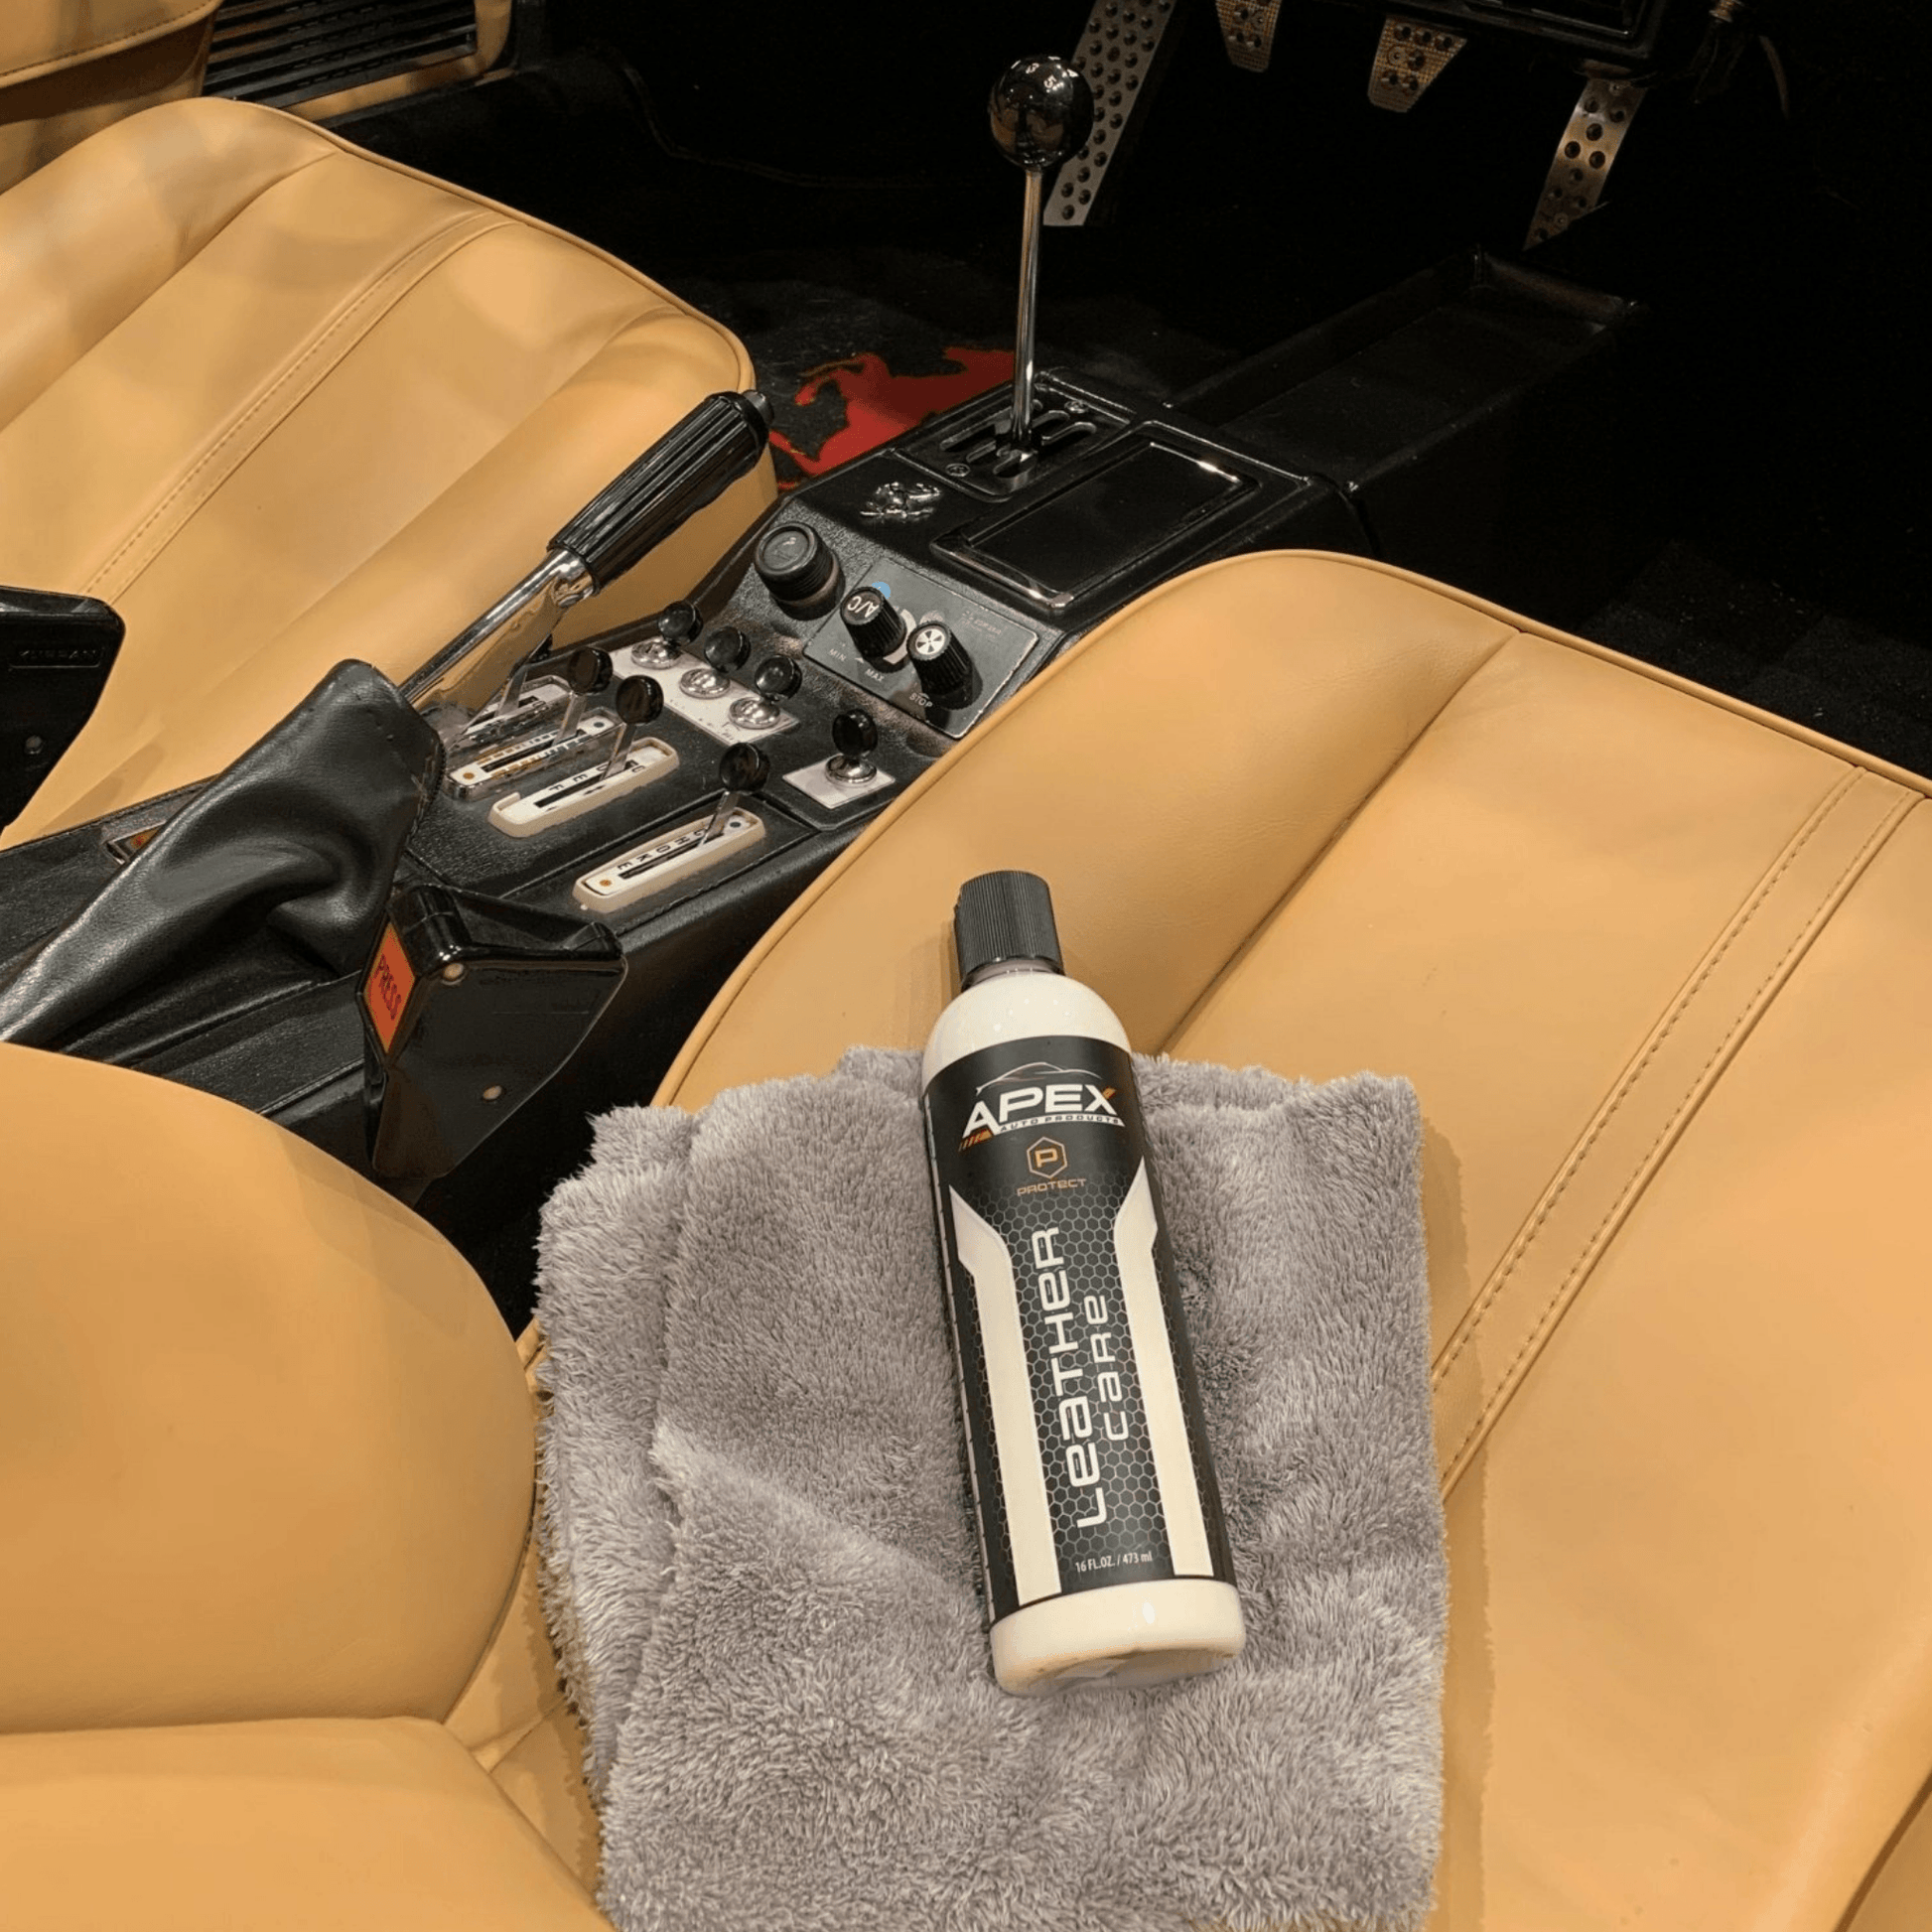 Apex Auto Products Leather Care - Fresh Leather